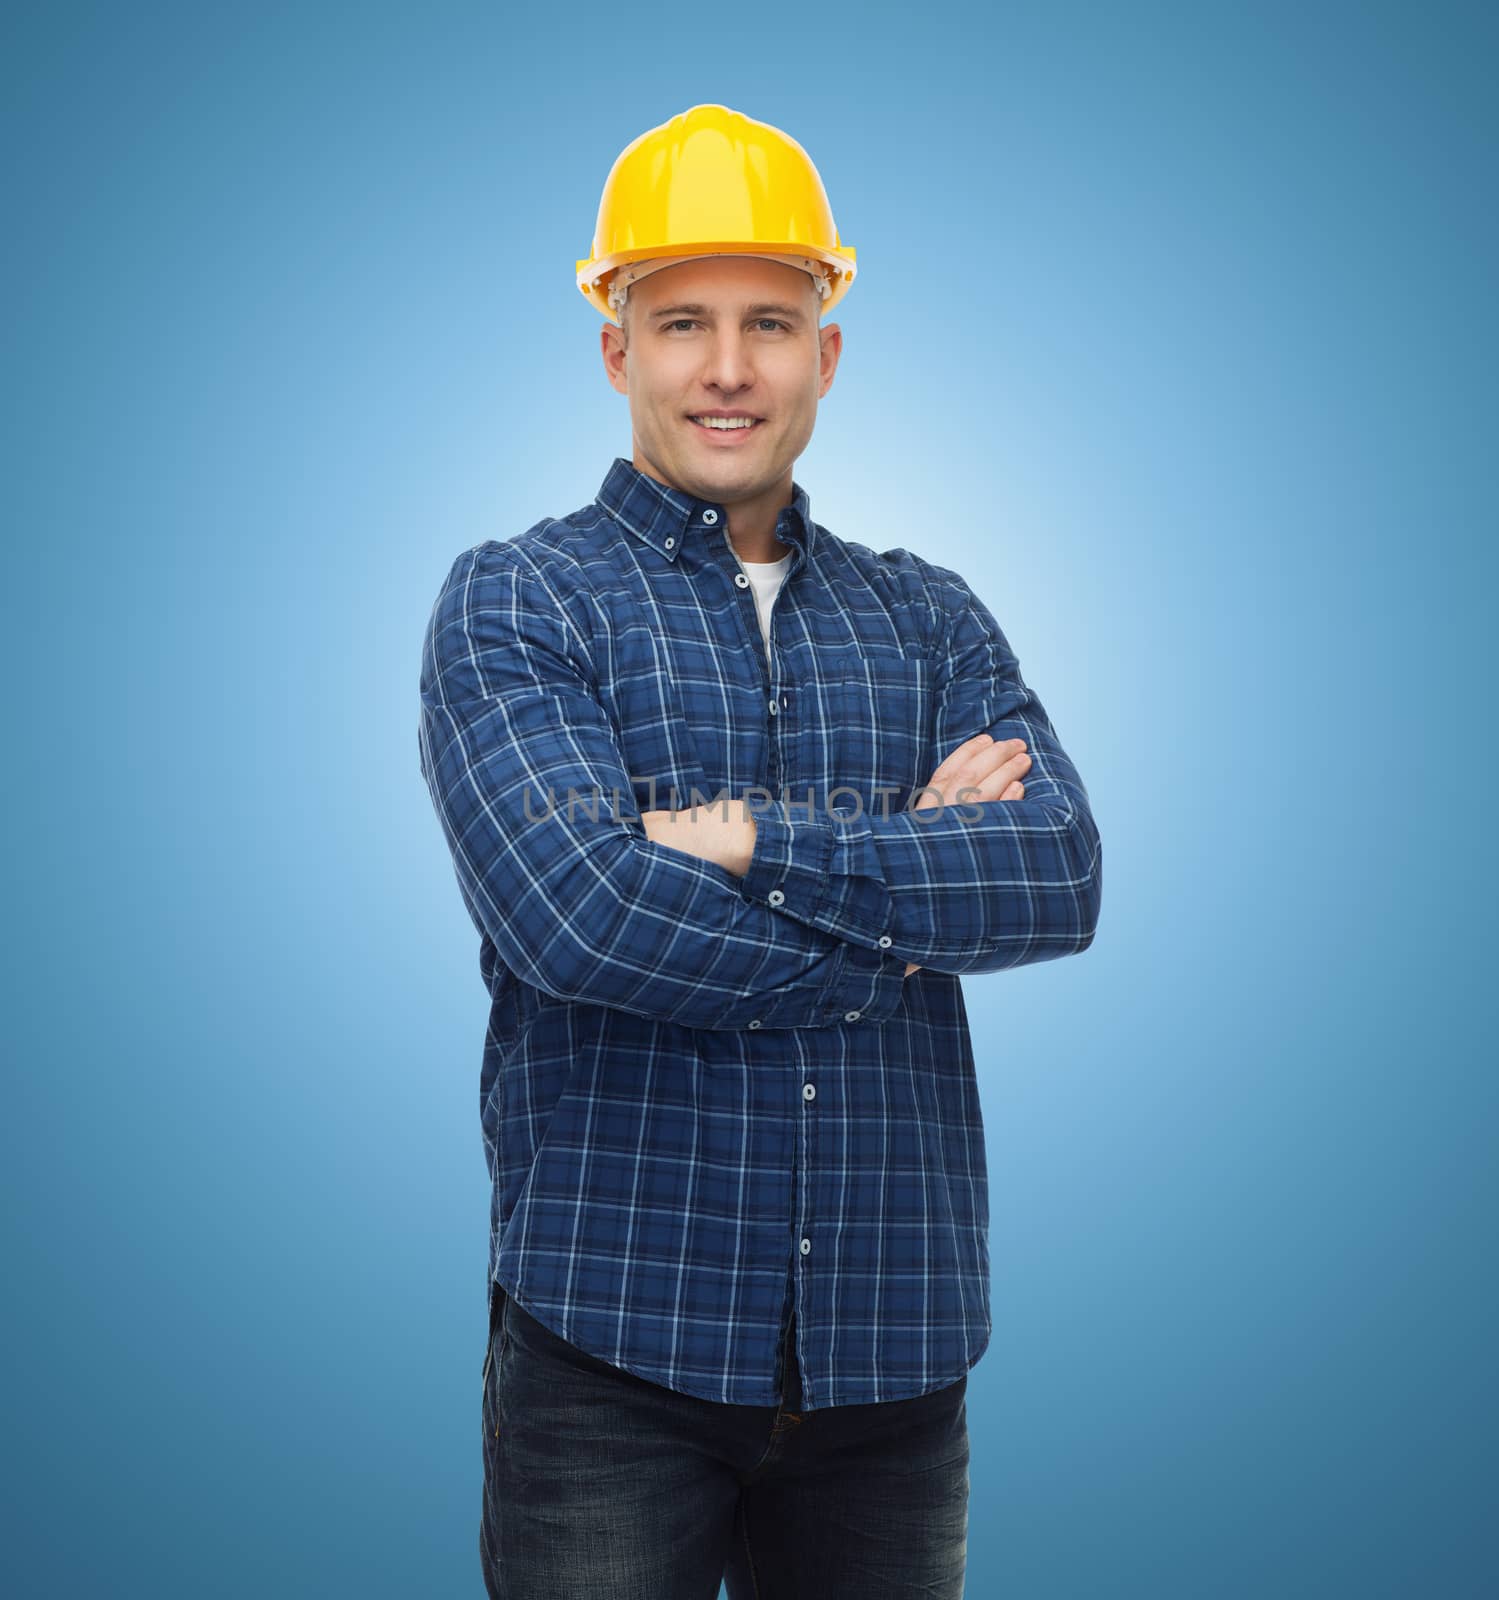 repair, construction, building, people and maintenance concept - smiling male builder or manual worker in helmet over blue background